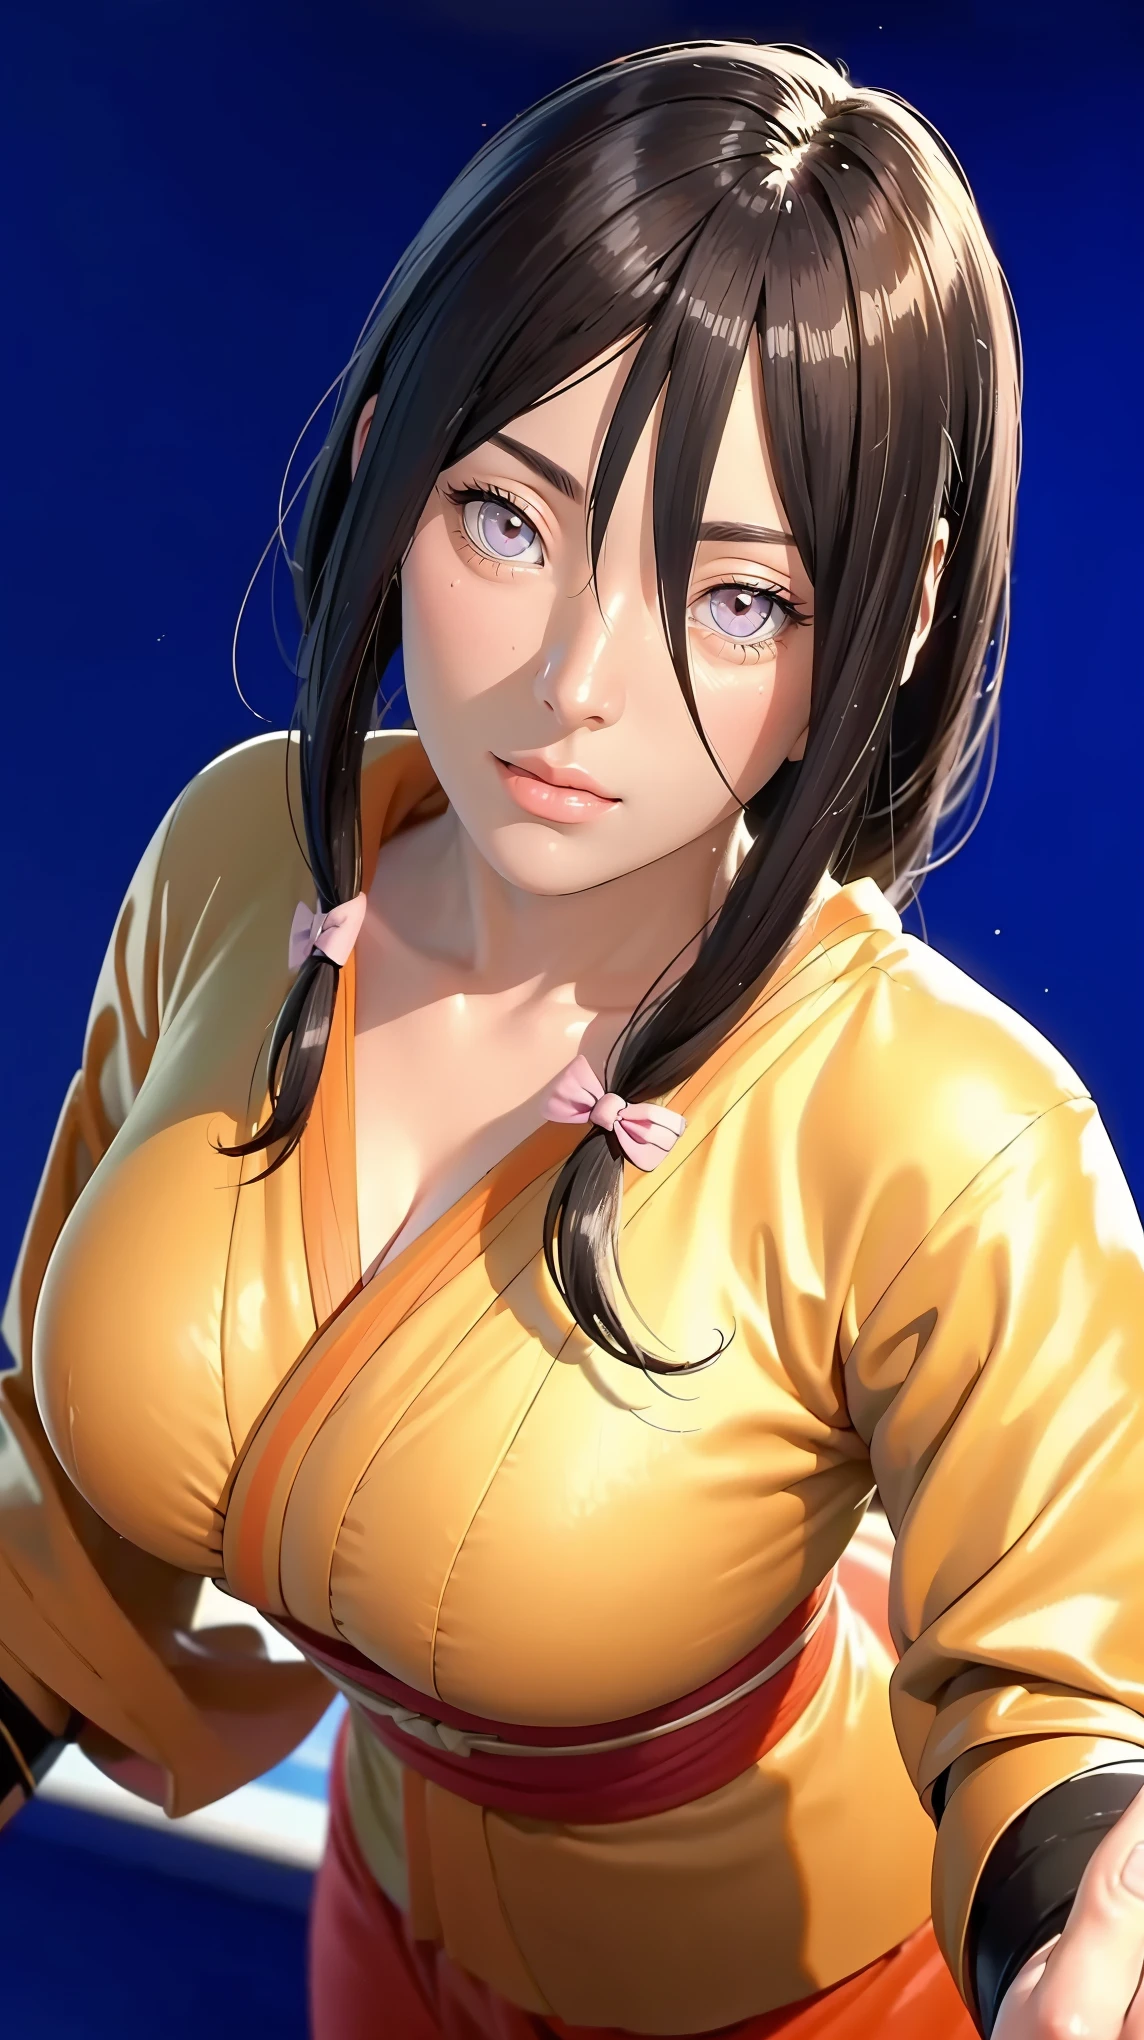 （（（Perfect figure，figure，orange kimono, obi，hakama skirt，work，flame print kimono，（（（hyuuga workbi，low tied long hair，hair bow，Light blue pupils））），S-shaped figure:1.7））），((masterpiece)),high resolution, ((Best quality at best))，masterpiece，quality，Best quality，（（（ Exquisite facial features，looking at the audience,There is light in the eyes，Happy，nterlacing of light and shadow，））），（（（looking into camera，black background，Exaggerated perspective , ultra wide shot,）））